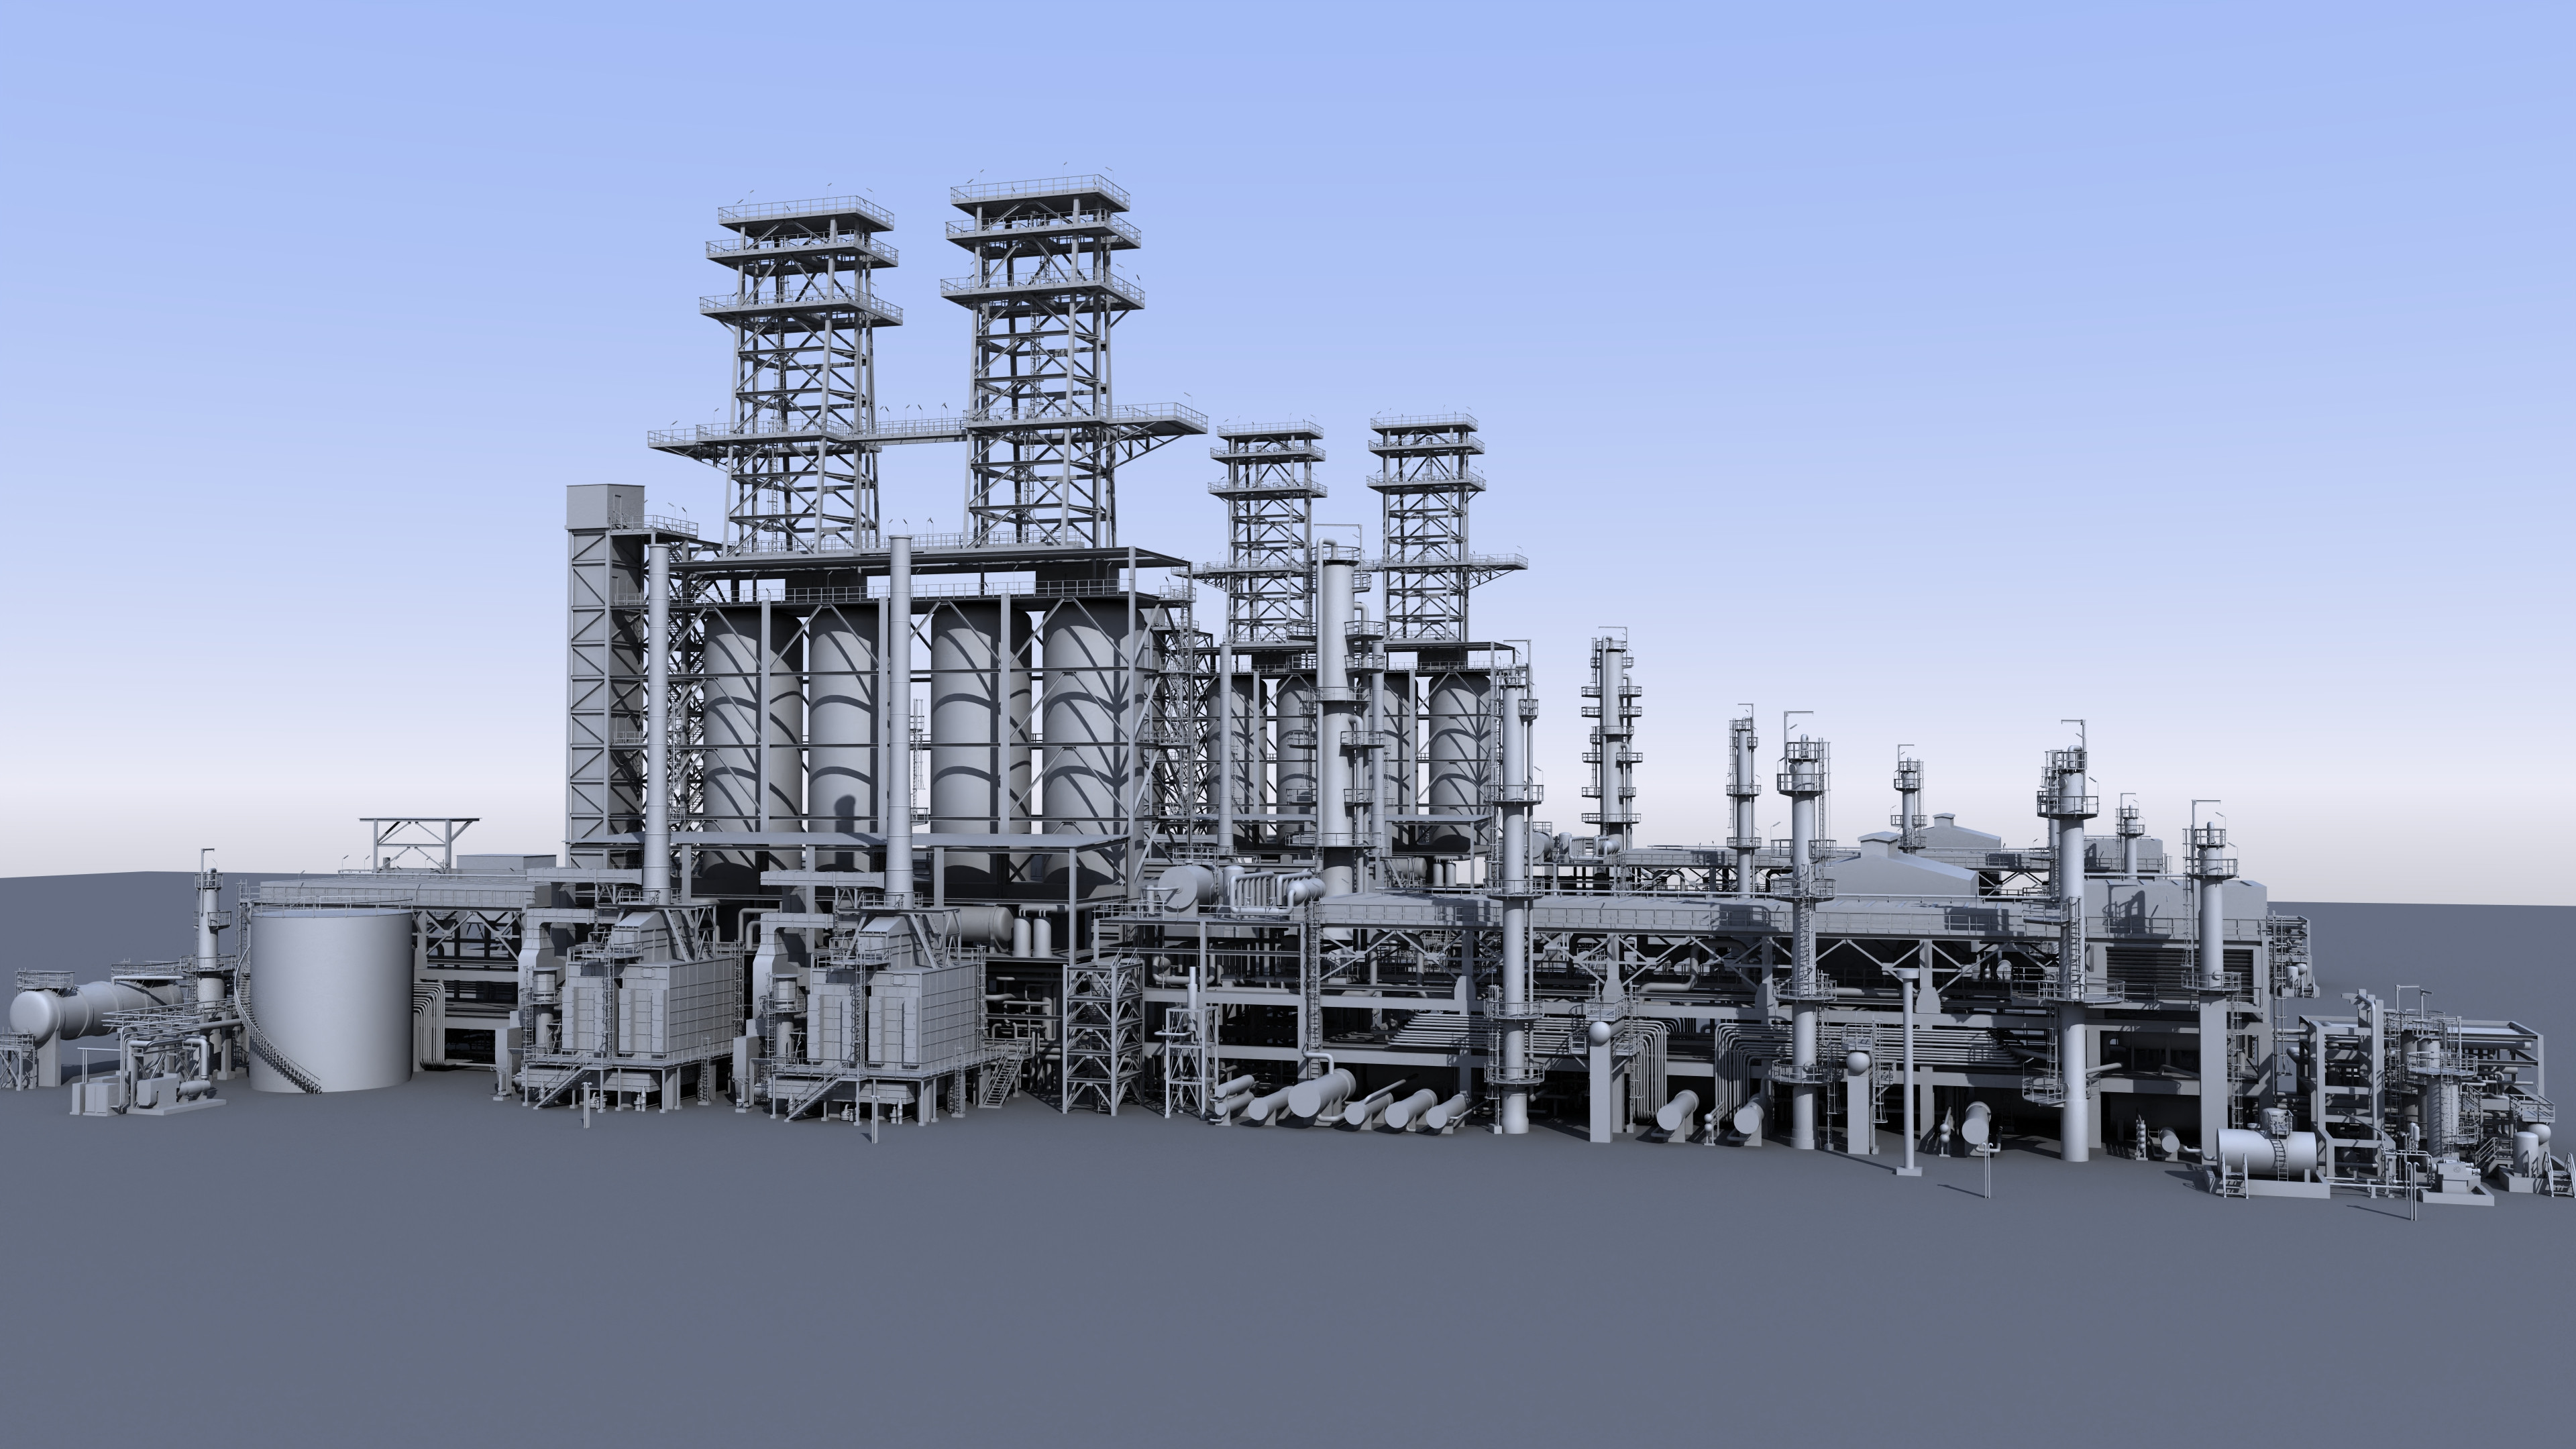 Coker unit section of oil refinery.